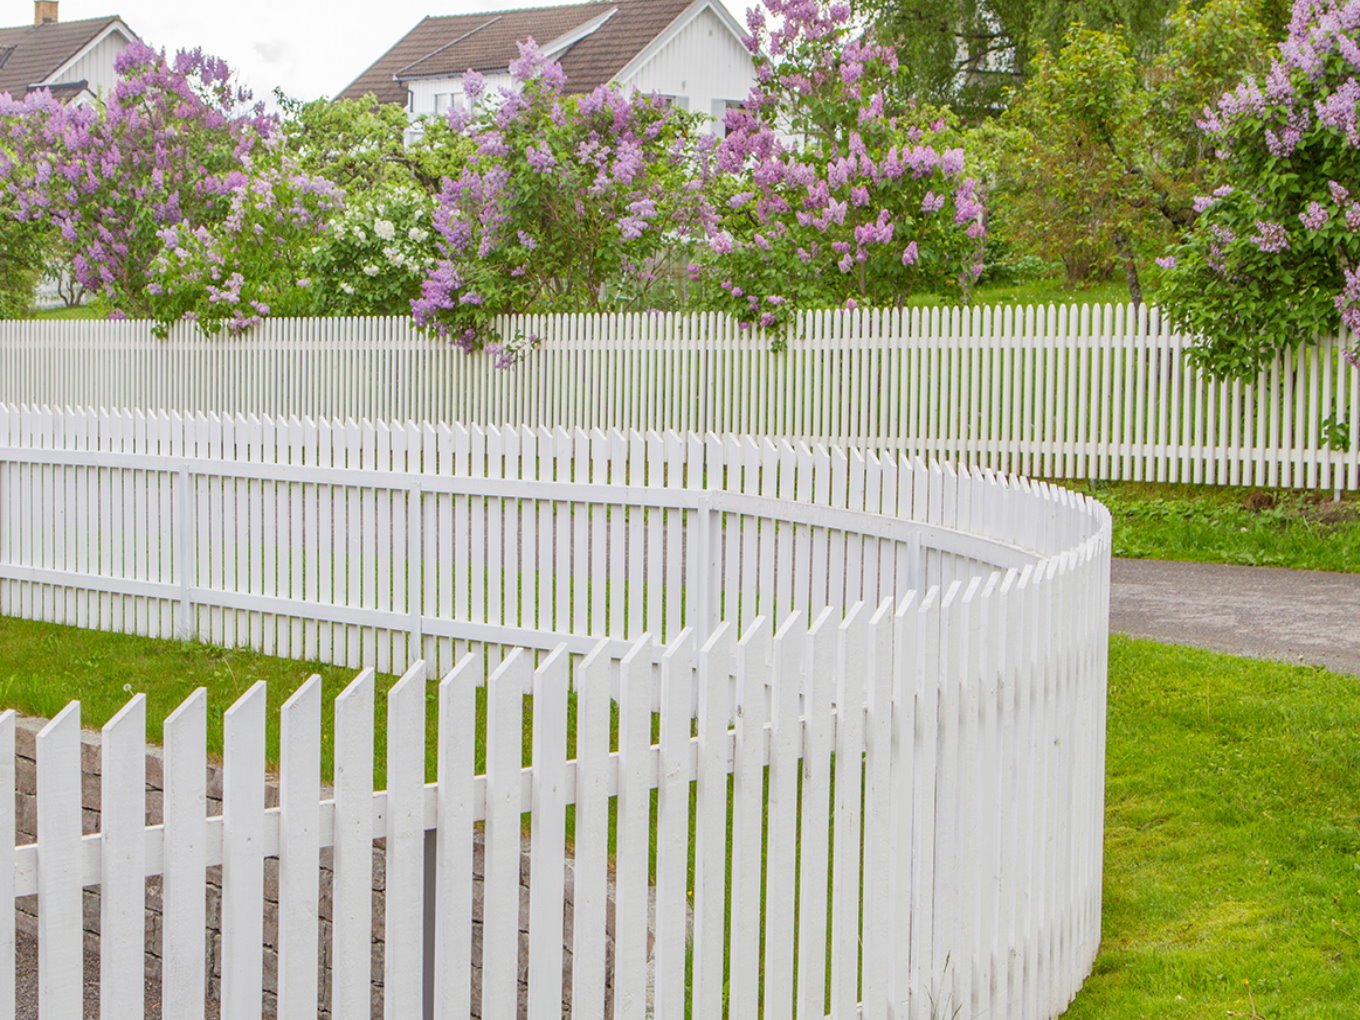 Nicholls Georgia residential and commercial fencing